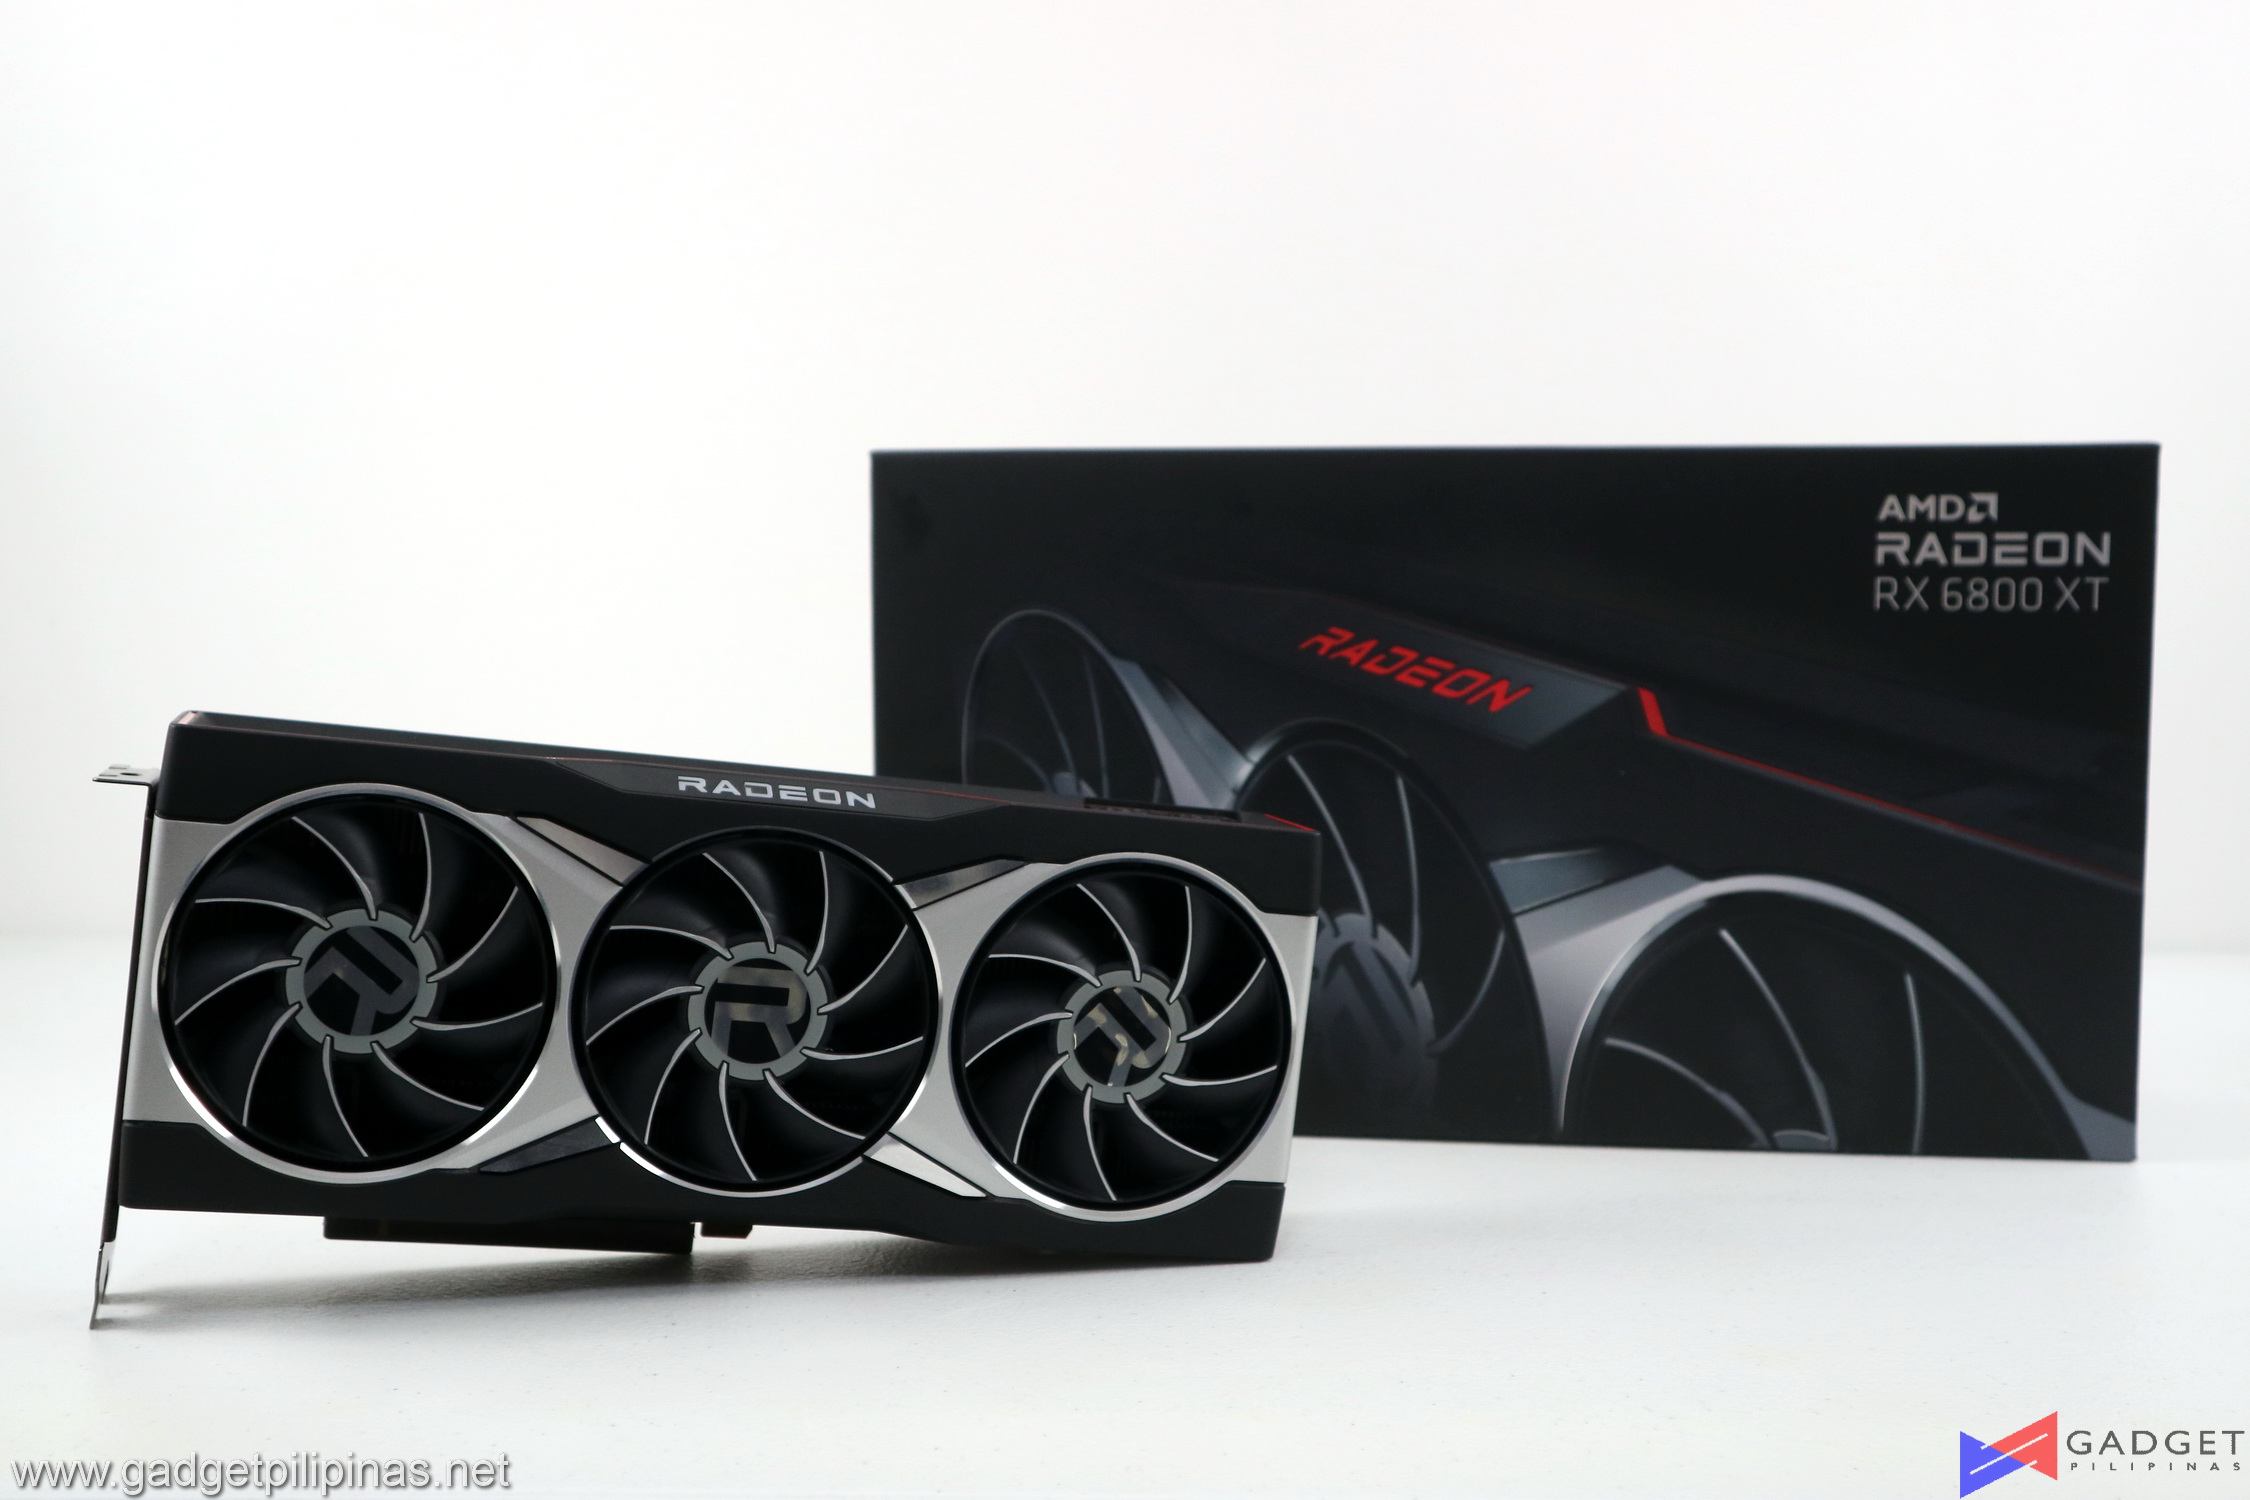 AMD Radeon RX 6800 XT Graphics Card Review – A Worthy Opposition